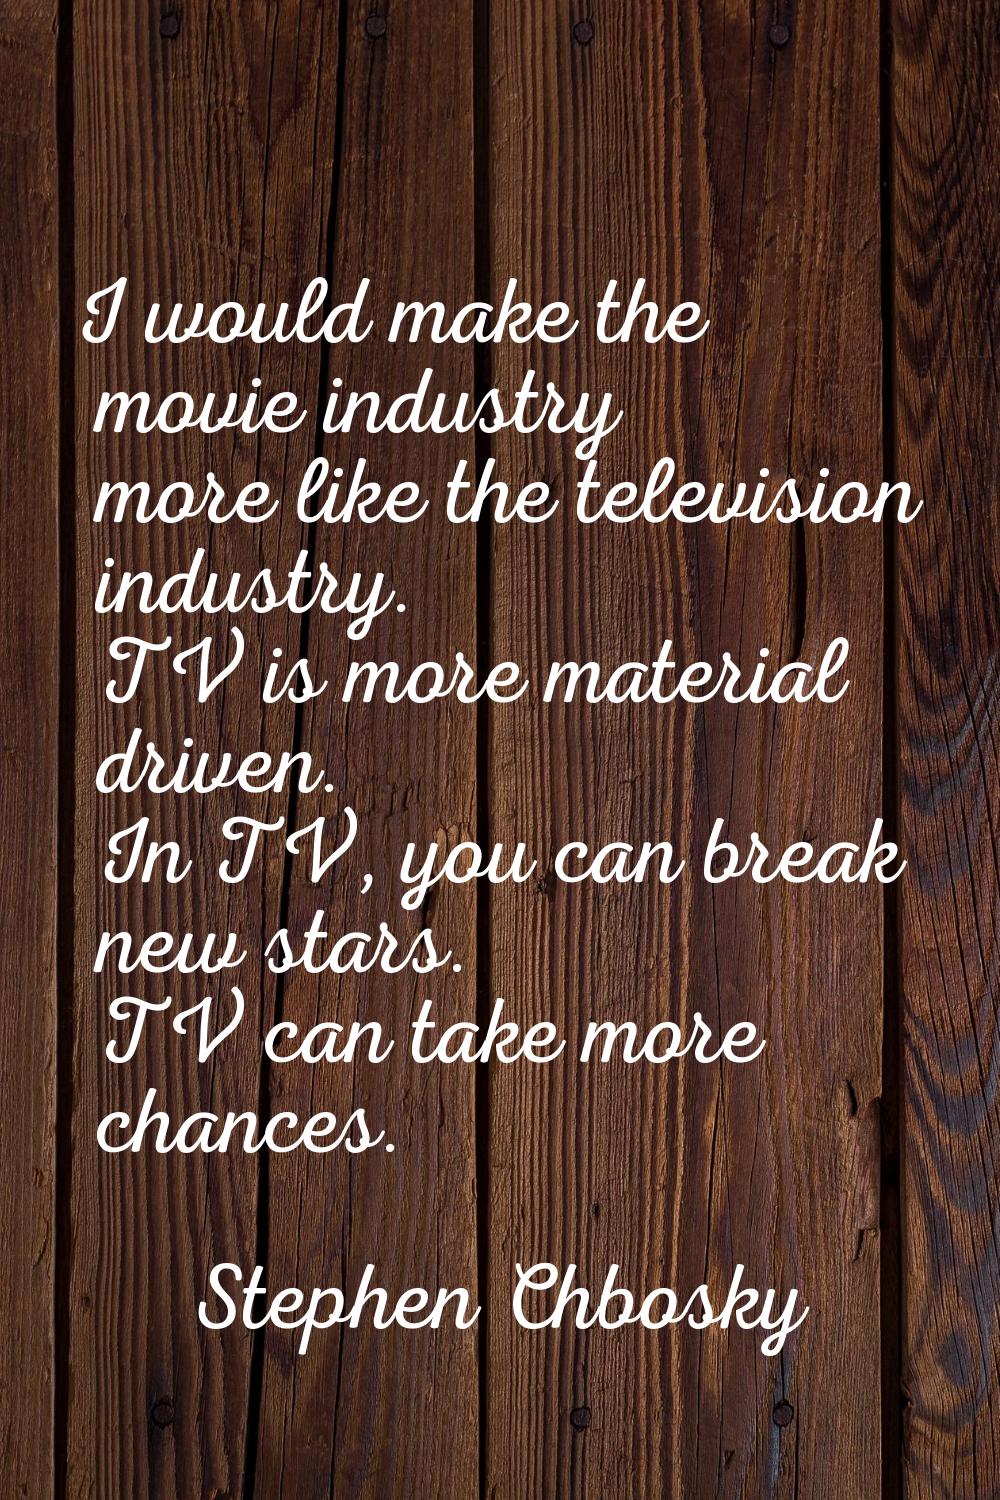 I would make the movie industry more like the television industry. TV is more material driven. In T